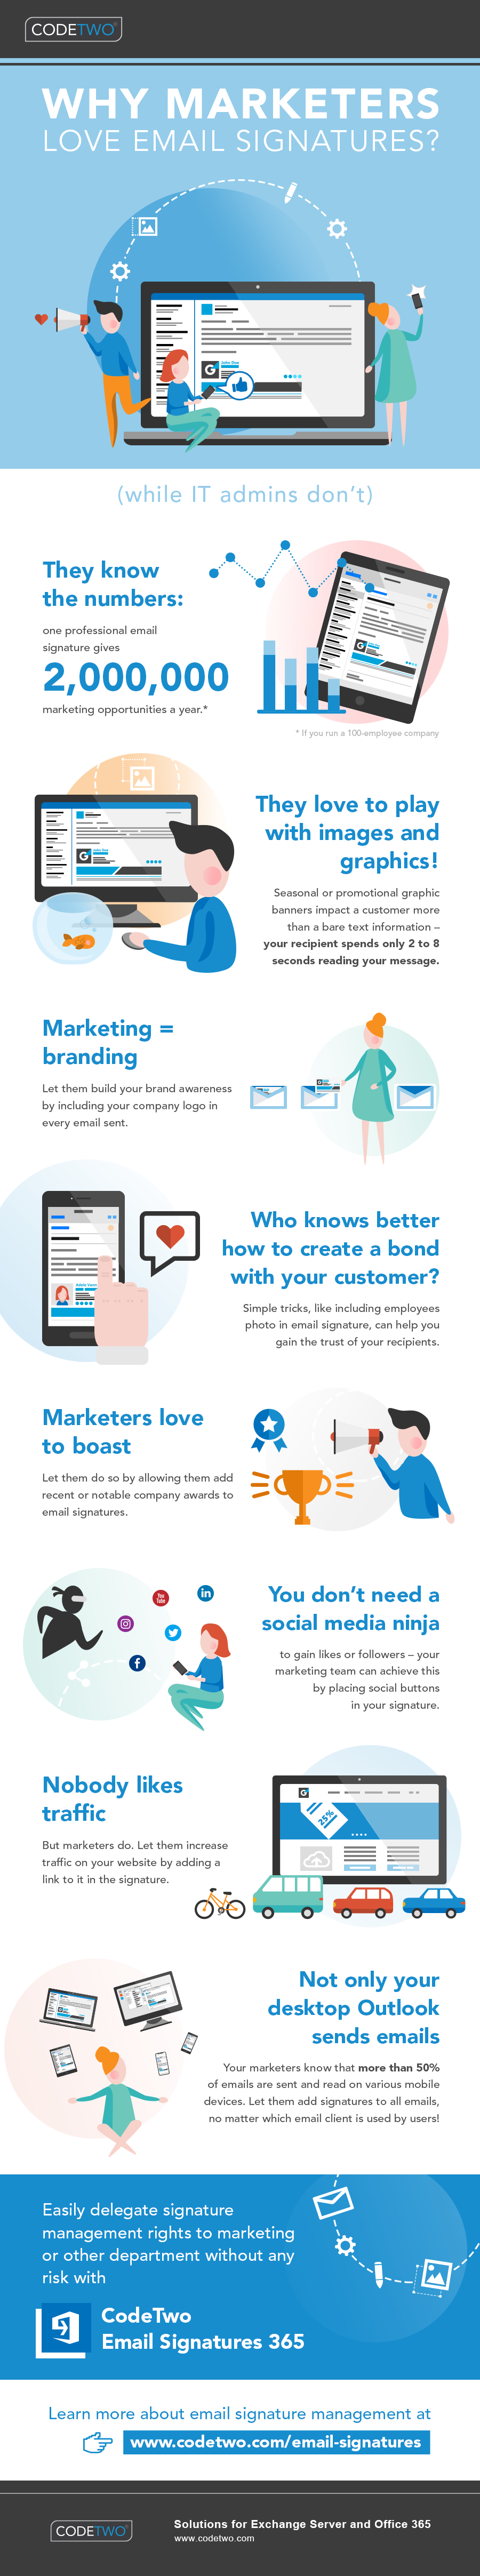 Why marketers love email signatures | Infographic